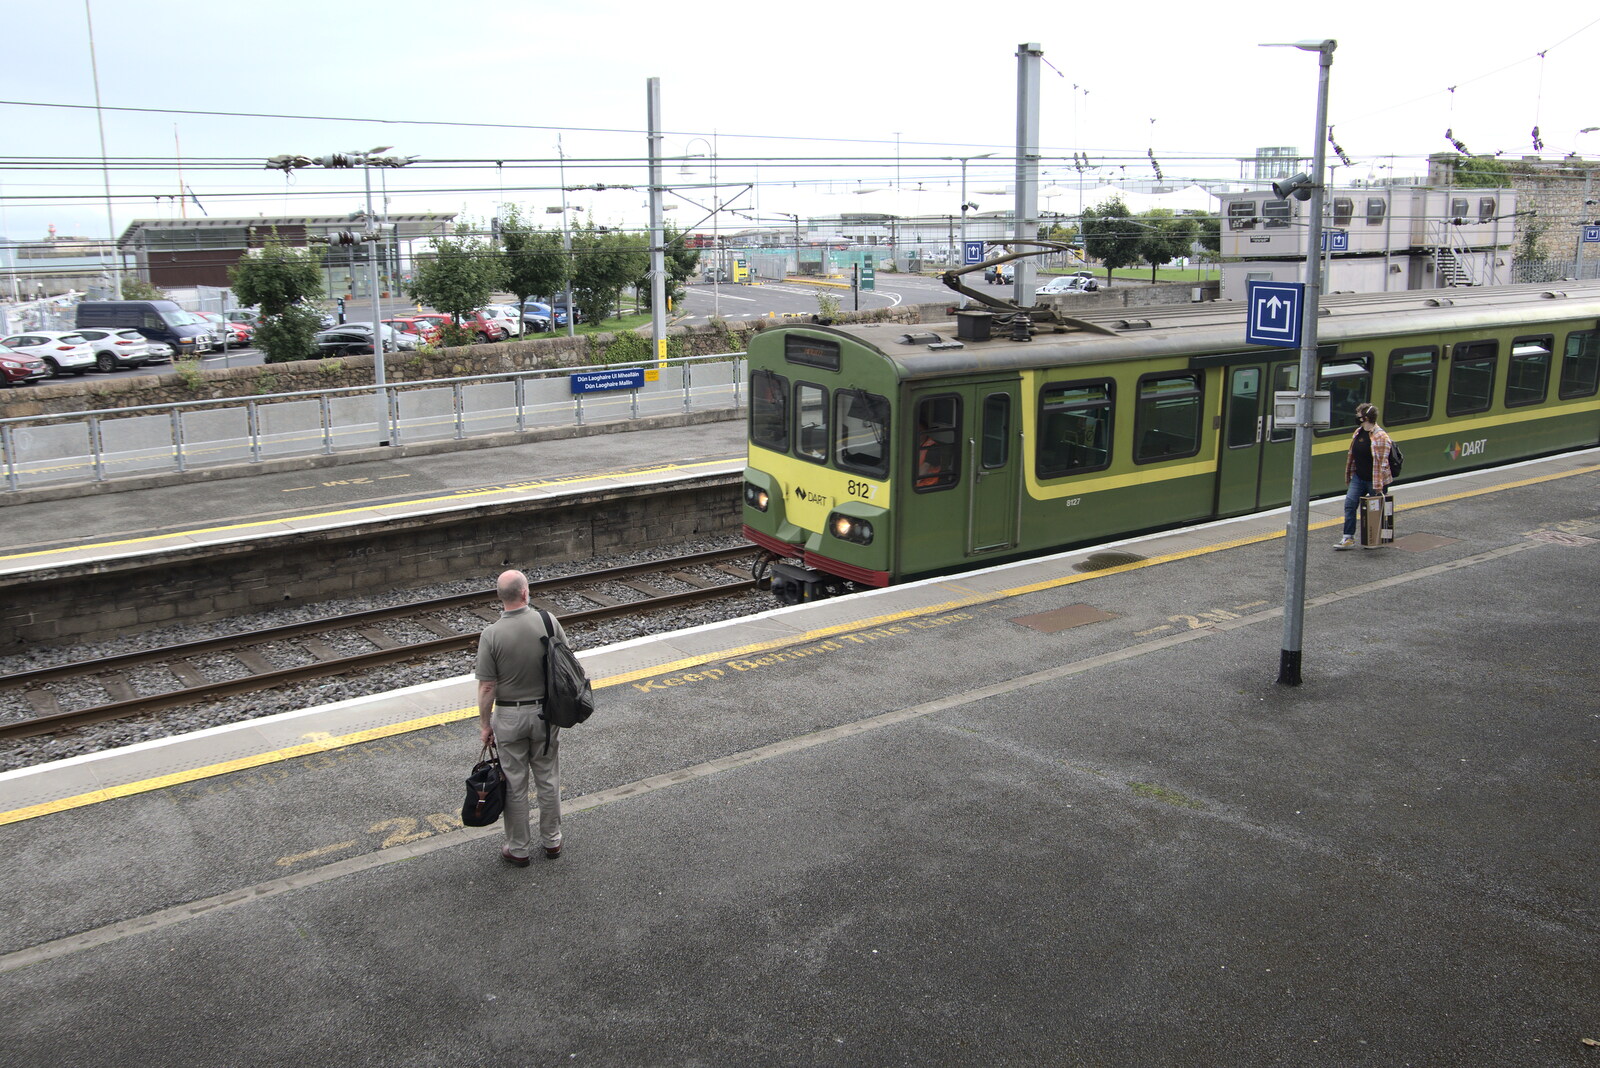 A DART train pulls in from Manorhamilton and the Street Art of Dún Laoghaire, Ireland - 15th August 2021